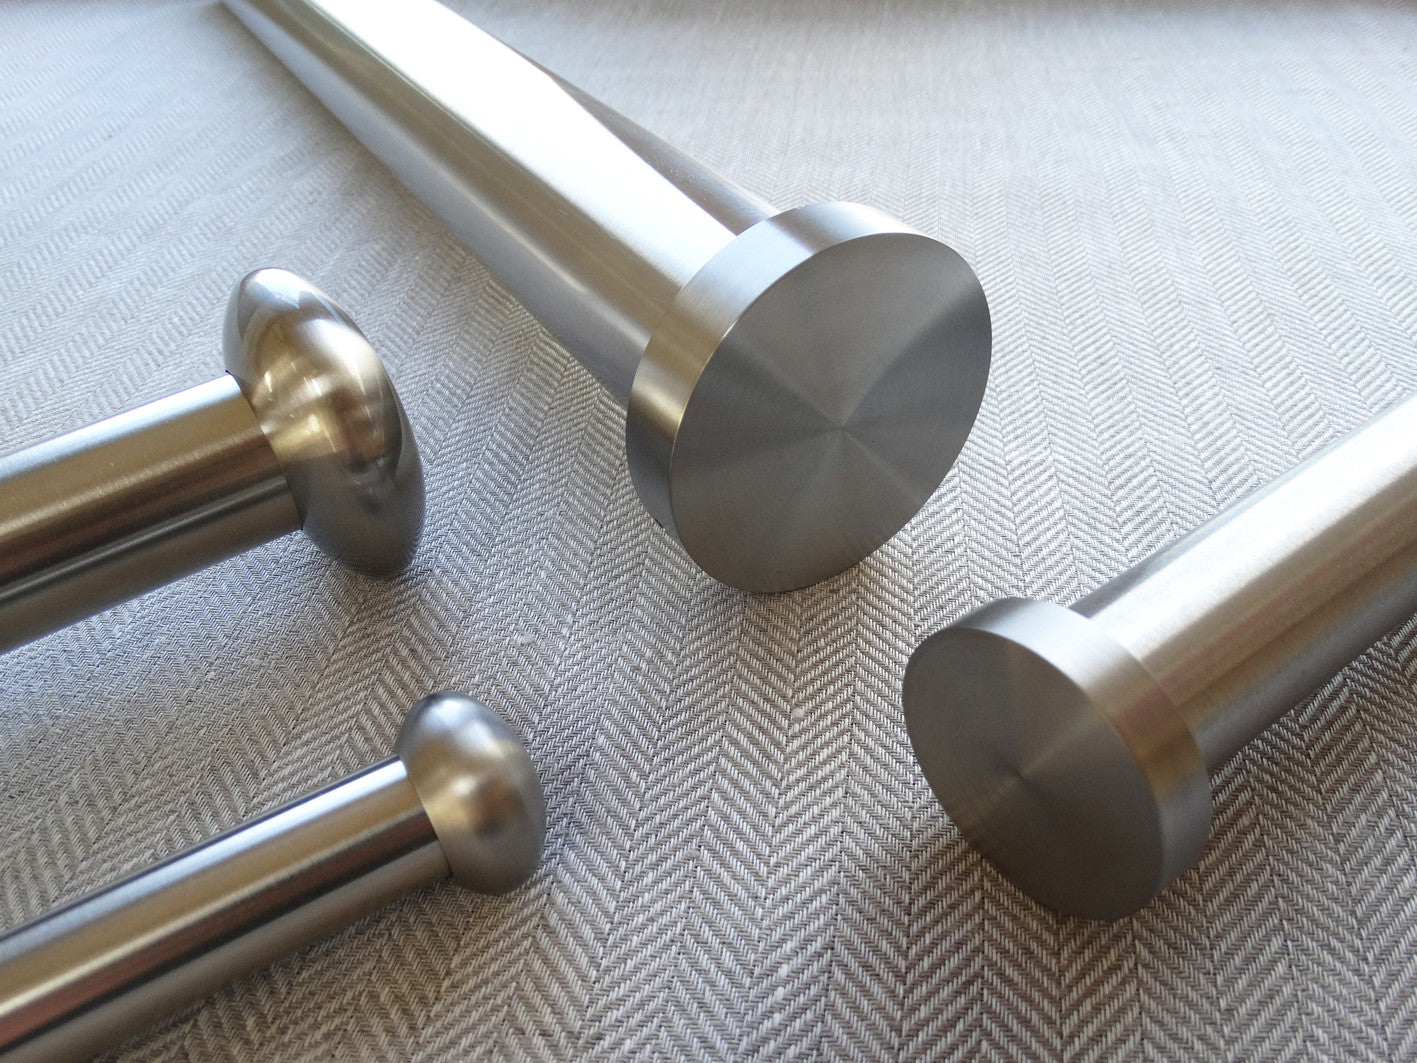 30mm diameter stainless steel curtain pole collection with Mini Disc finials